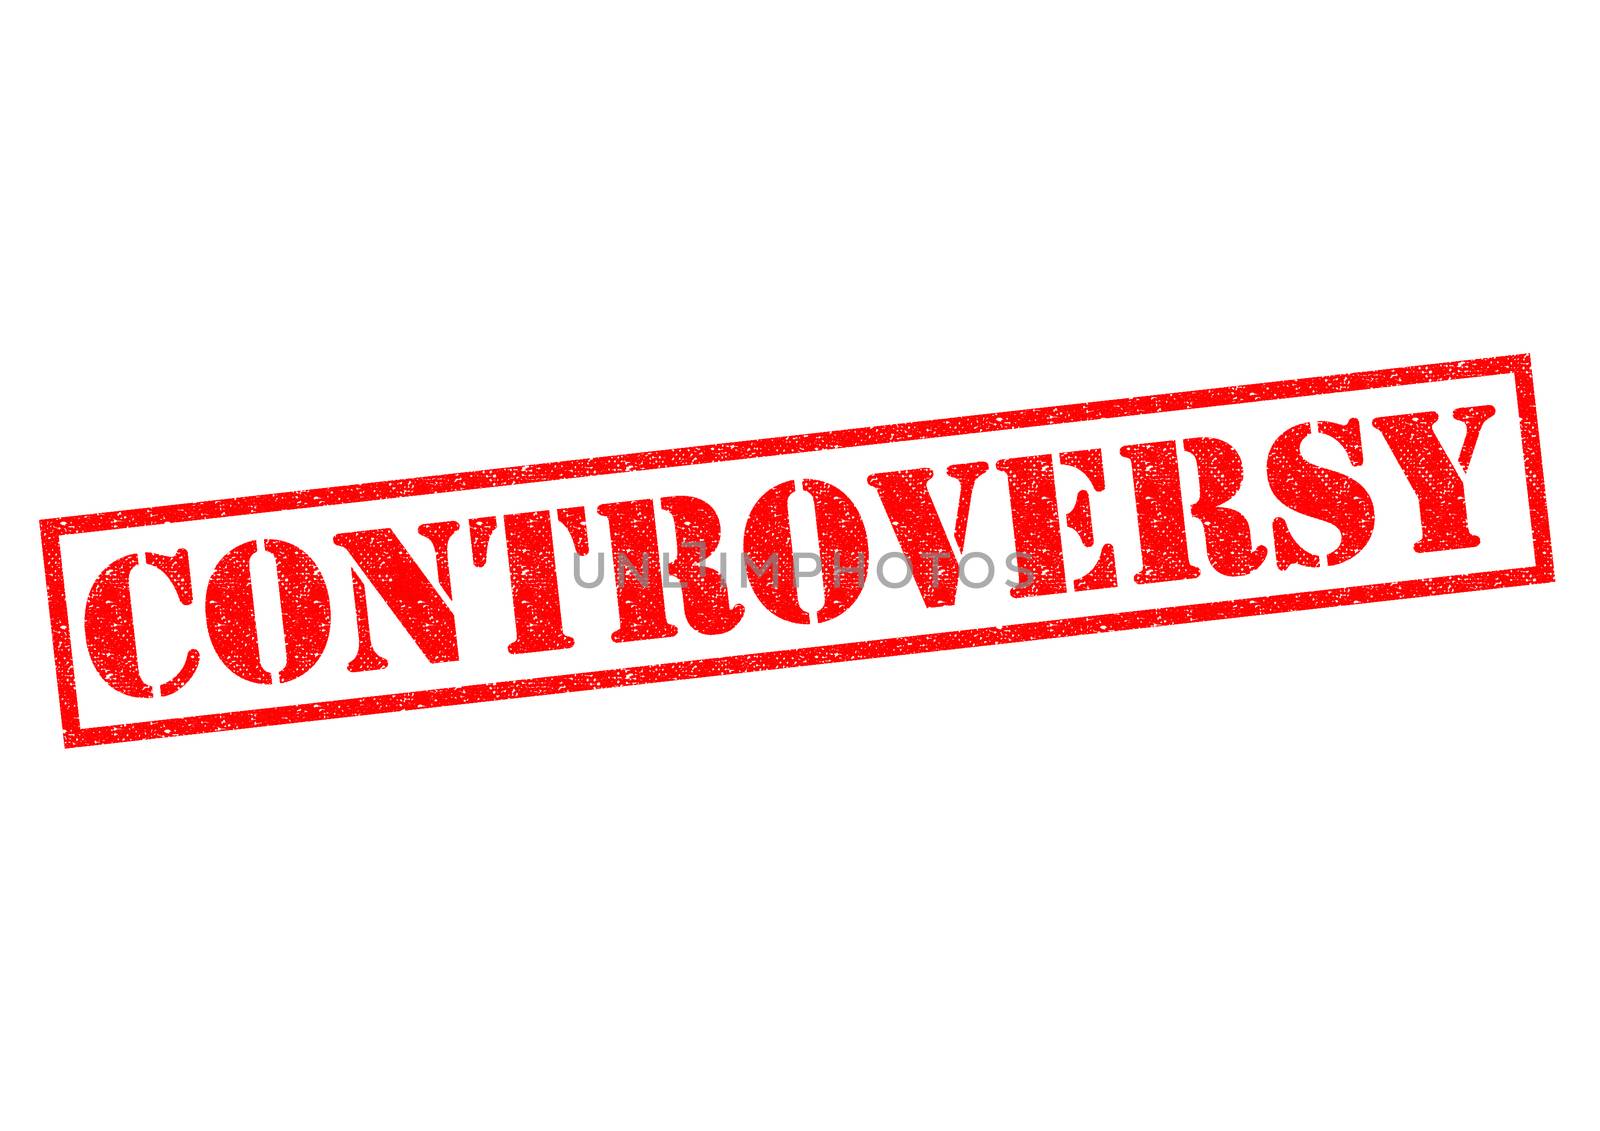 CONTROVERSY red Rubber Stamp over a white background.